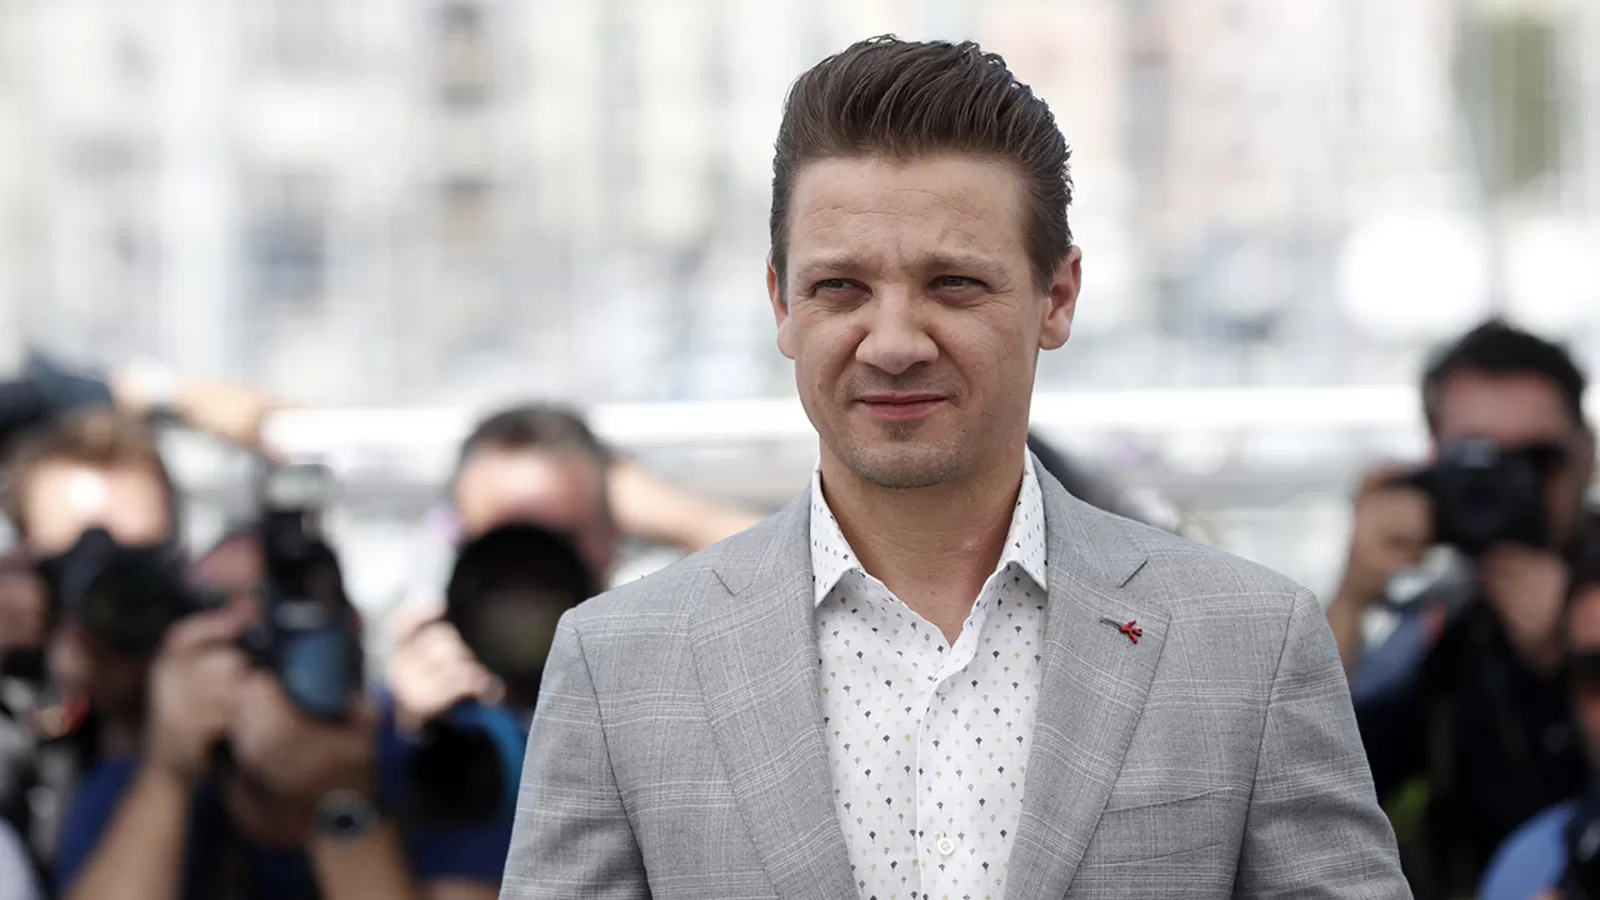 Jeremy Renner out of surgery after suffering chest trauma and orthopedic injuries in snowplow accident, publicist says